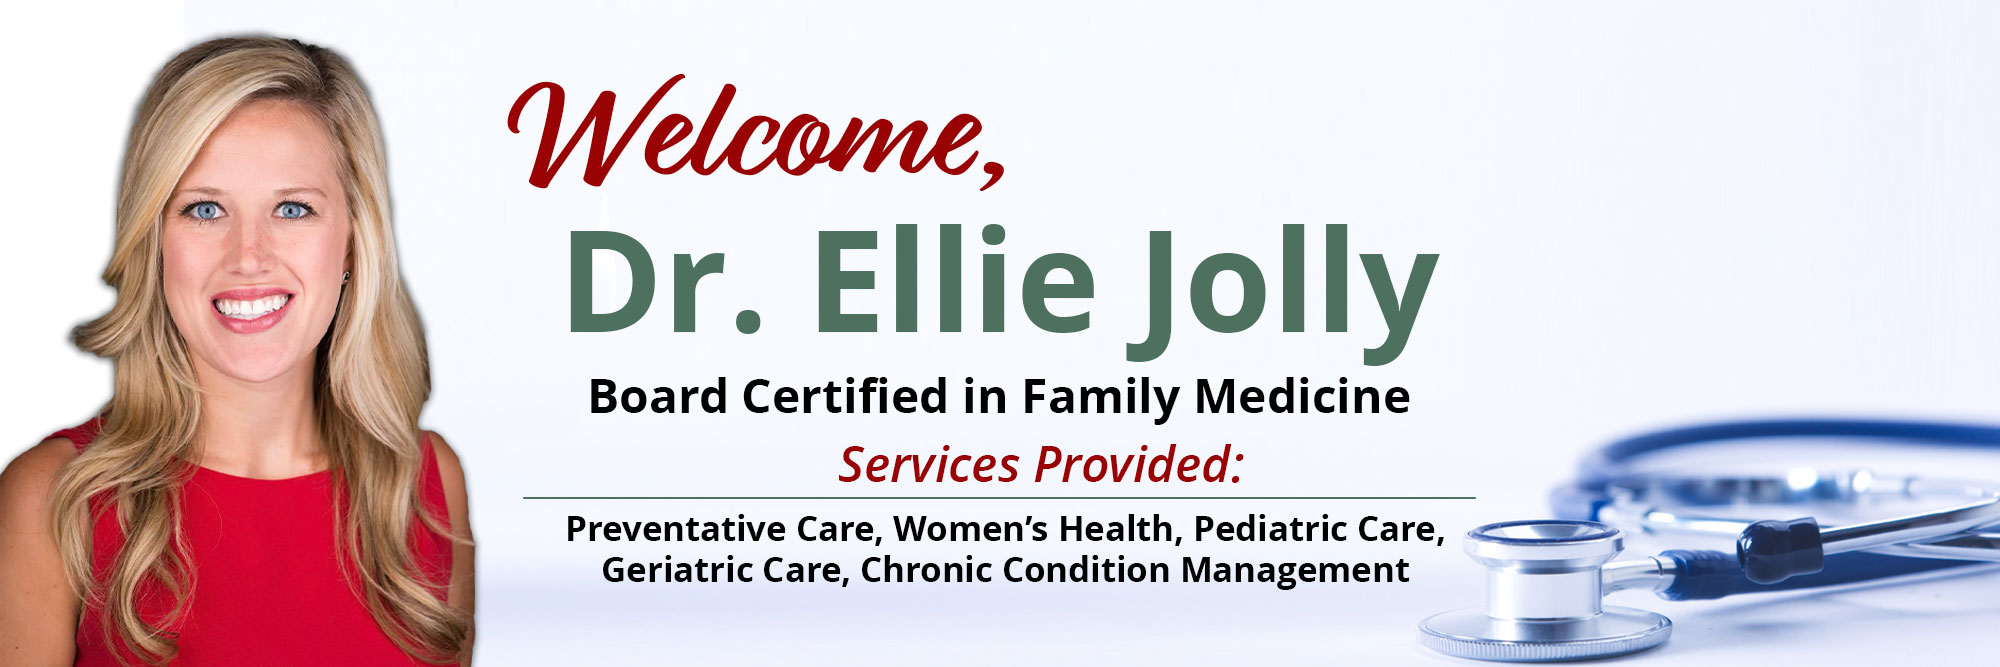 Welcome, Dr. Ellie Jolly
Board Certified in Family Medicine
Service Provided :

Preventative Care, Women's Health, Pediatric Care, Geriatic Care, Chronic Condition Management